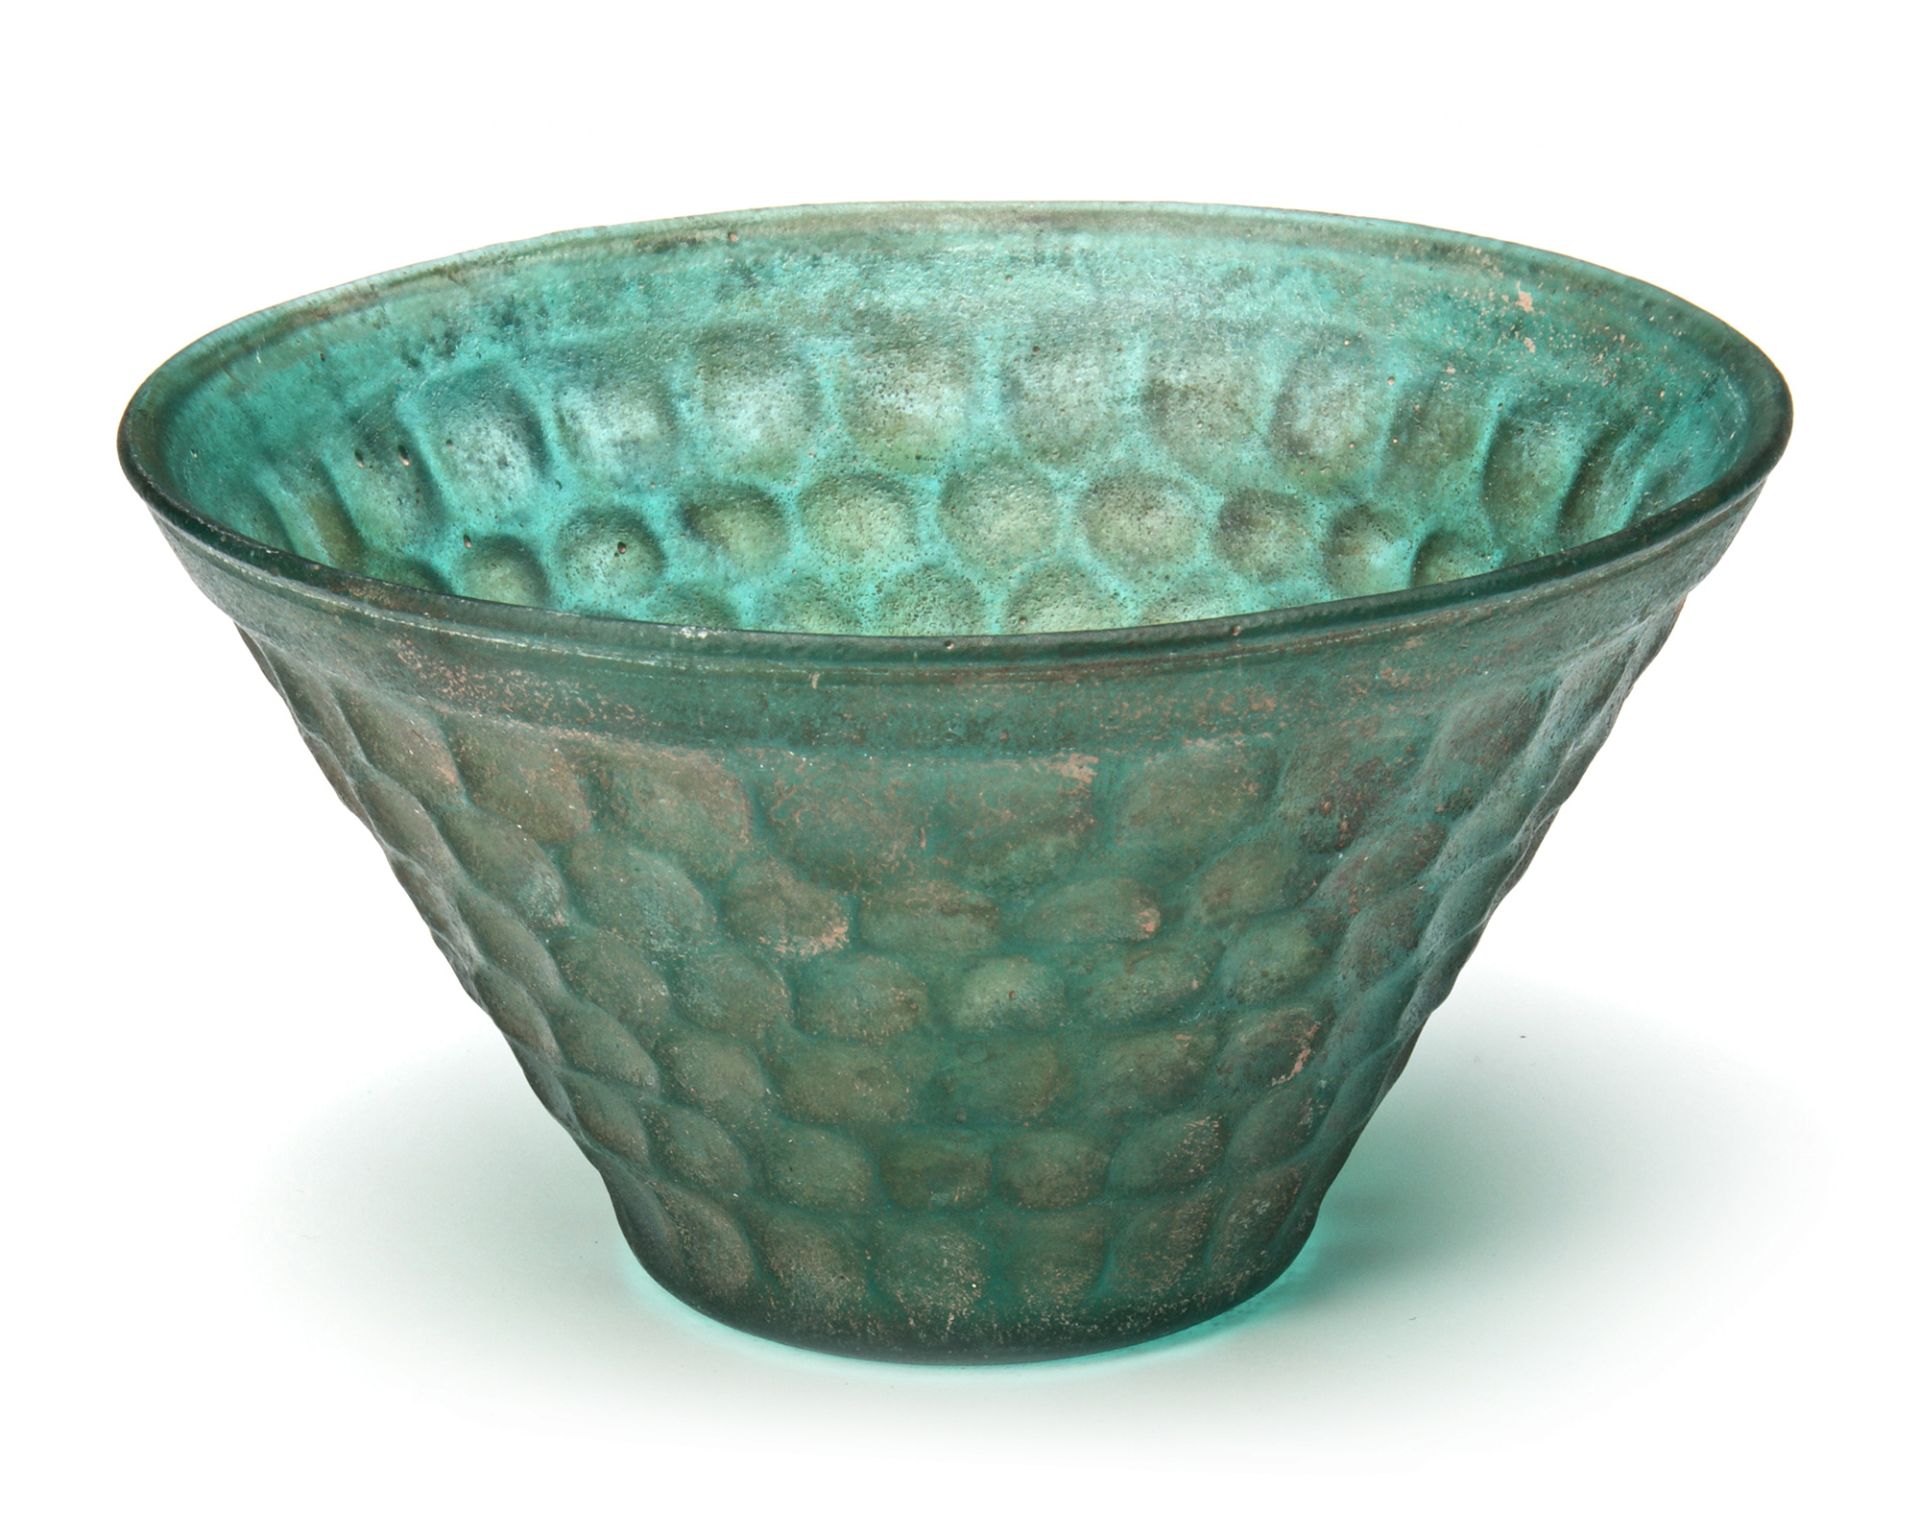 A PERSIAN GREEN CUT GLASS BOWL, 8TH-9TH CENTURY - Image 7 of 10